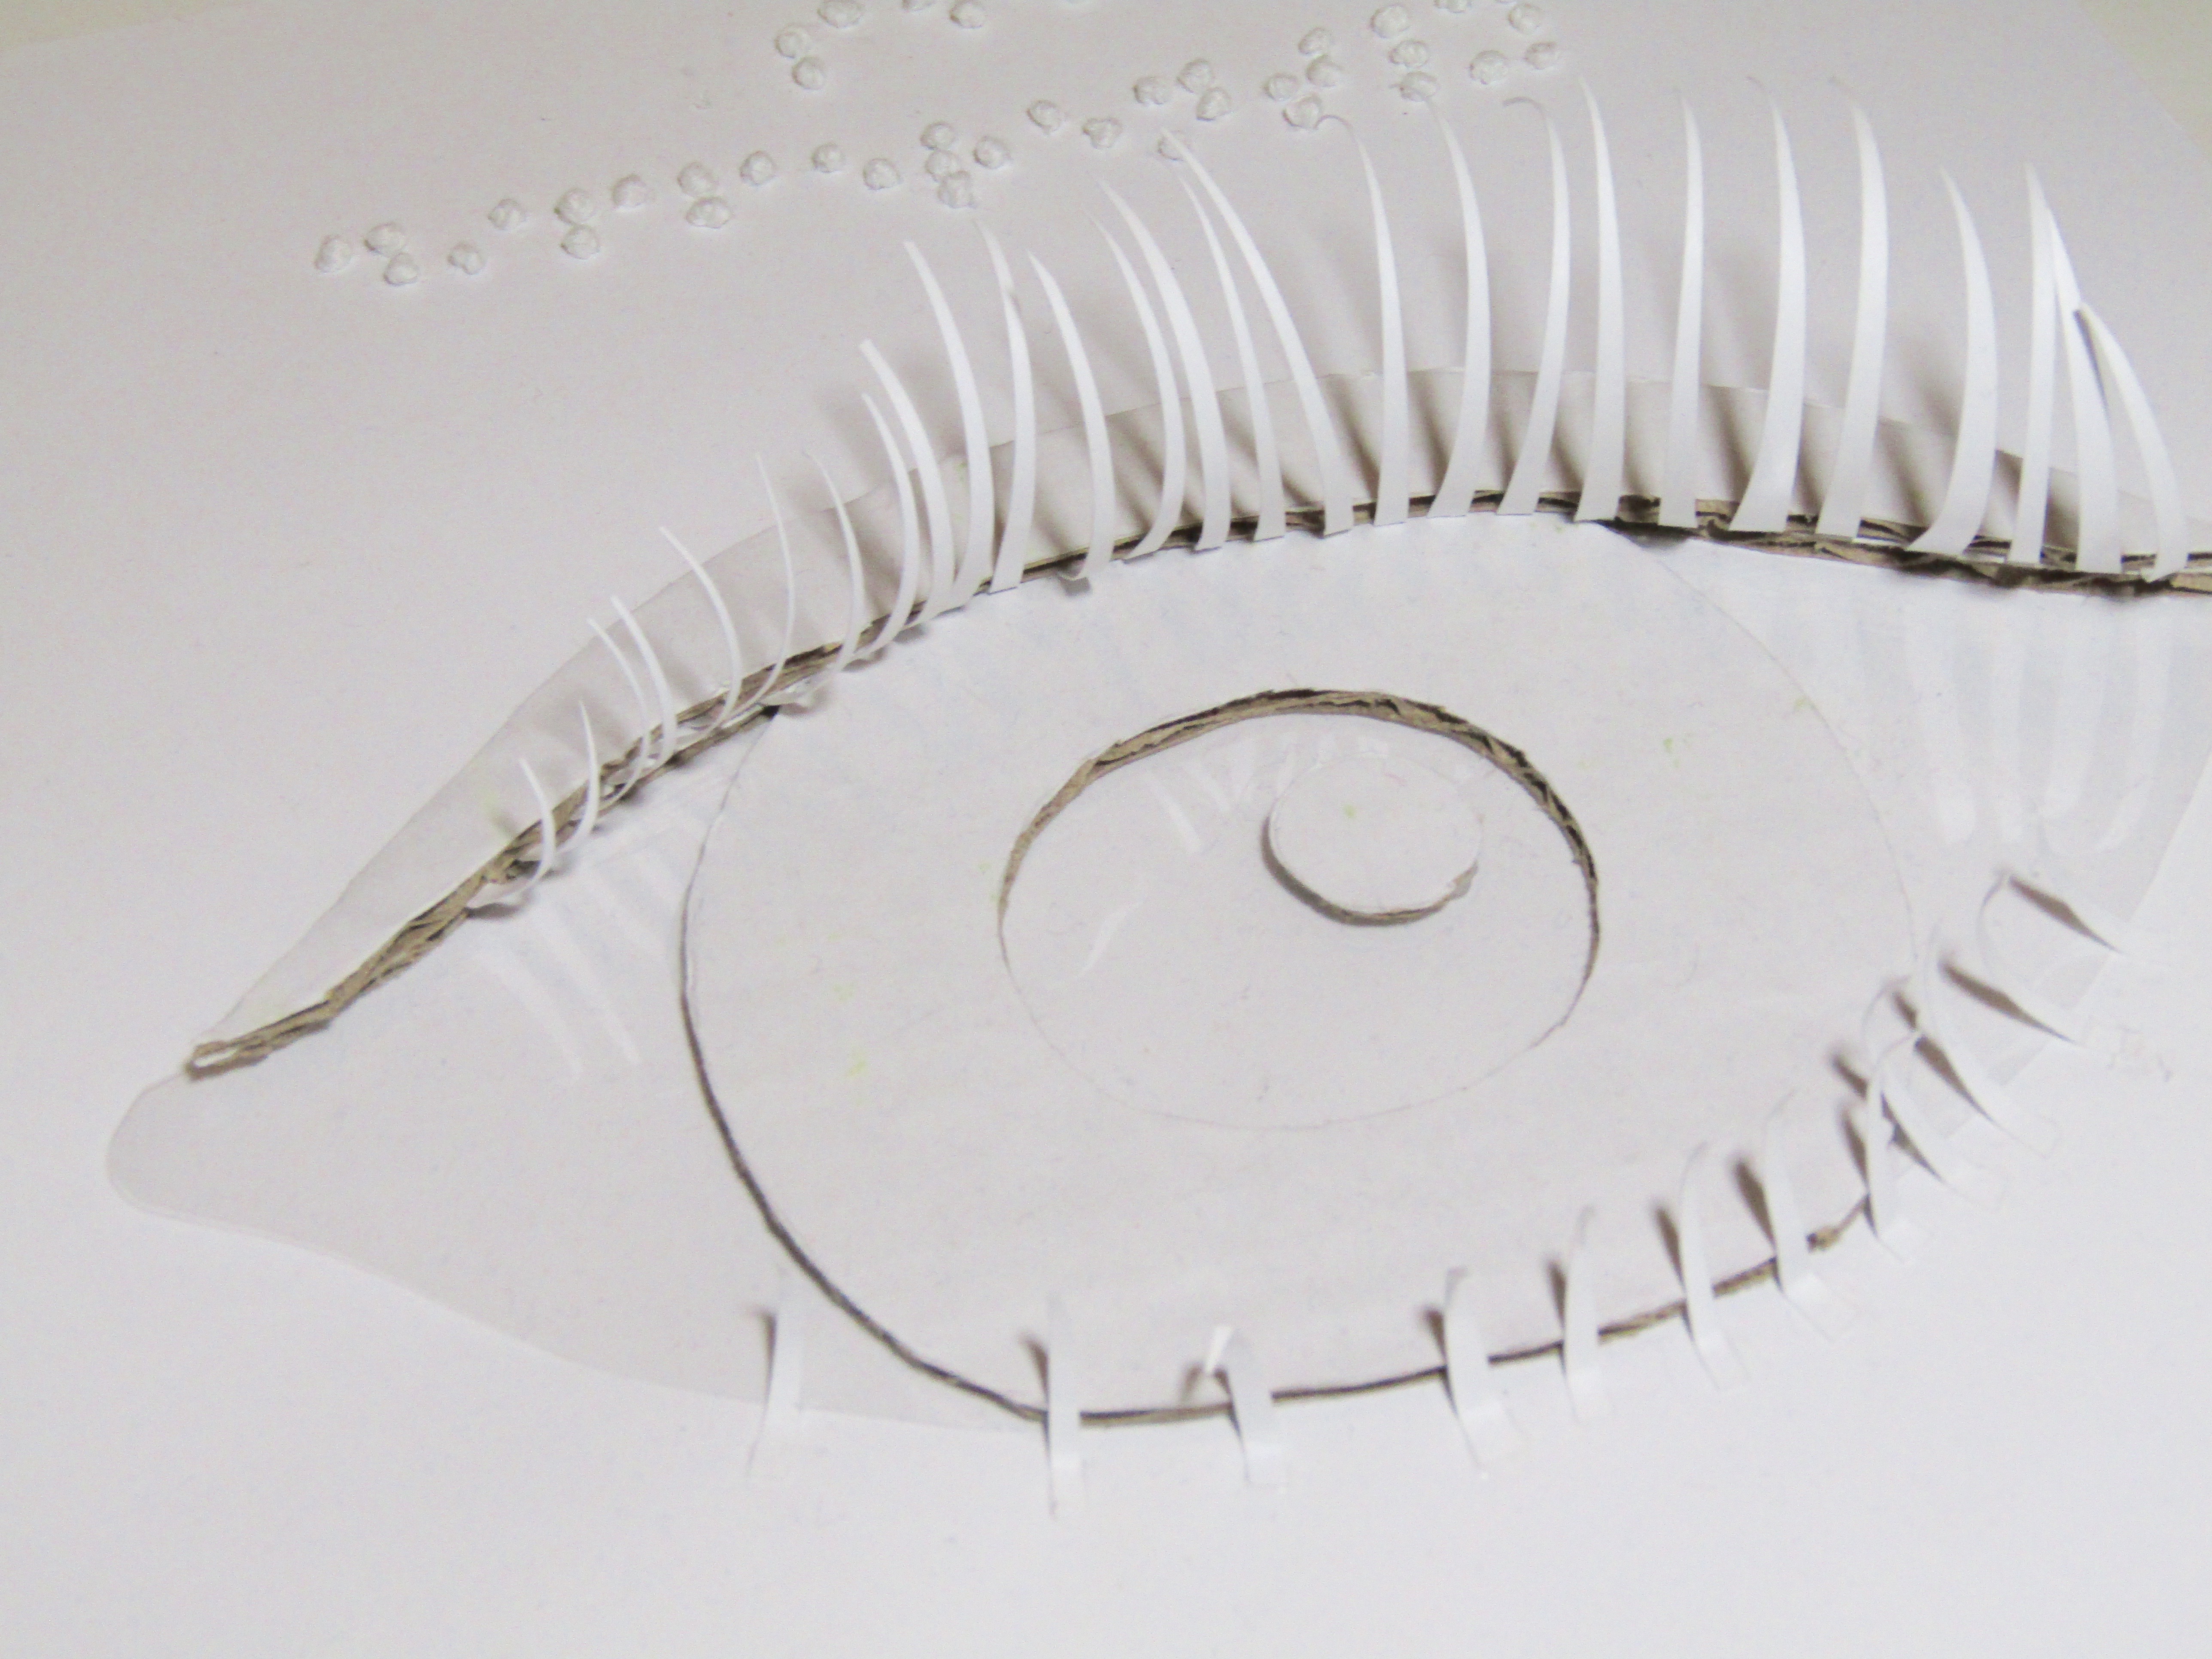 Close-up of the cut-out eye, complete with eyelashes and a pupil.